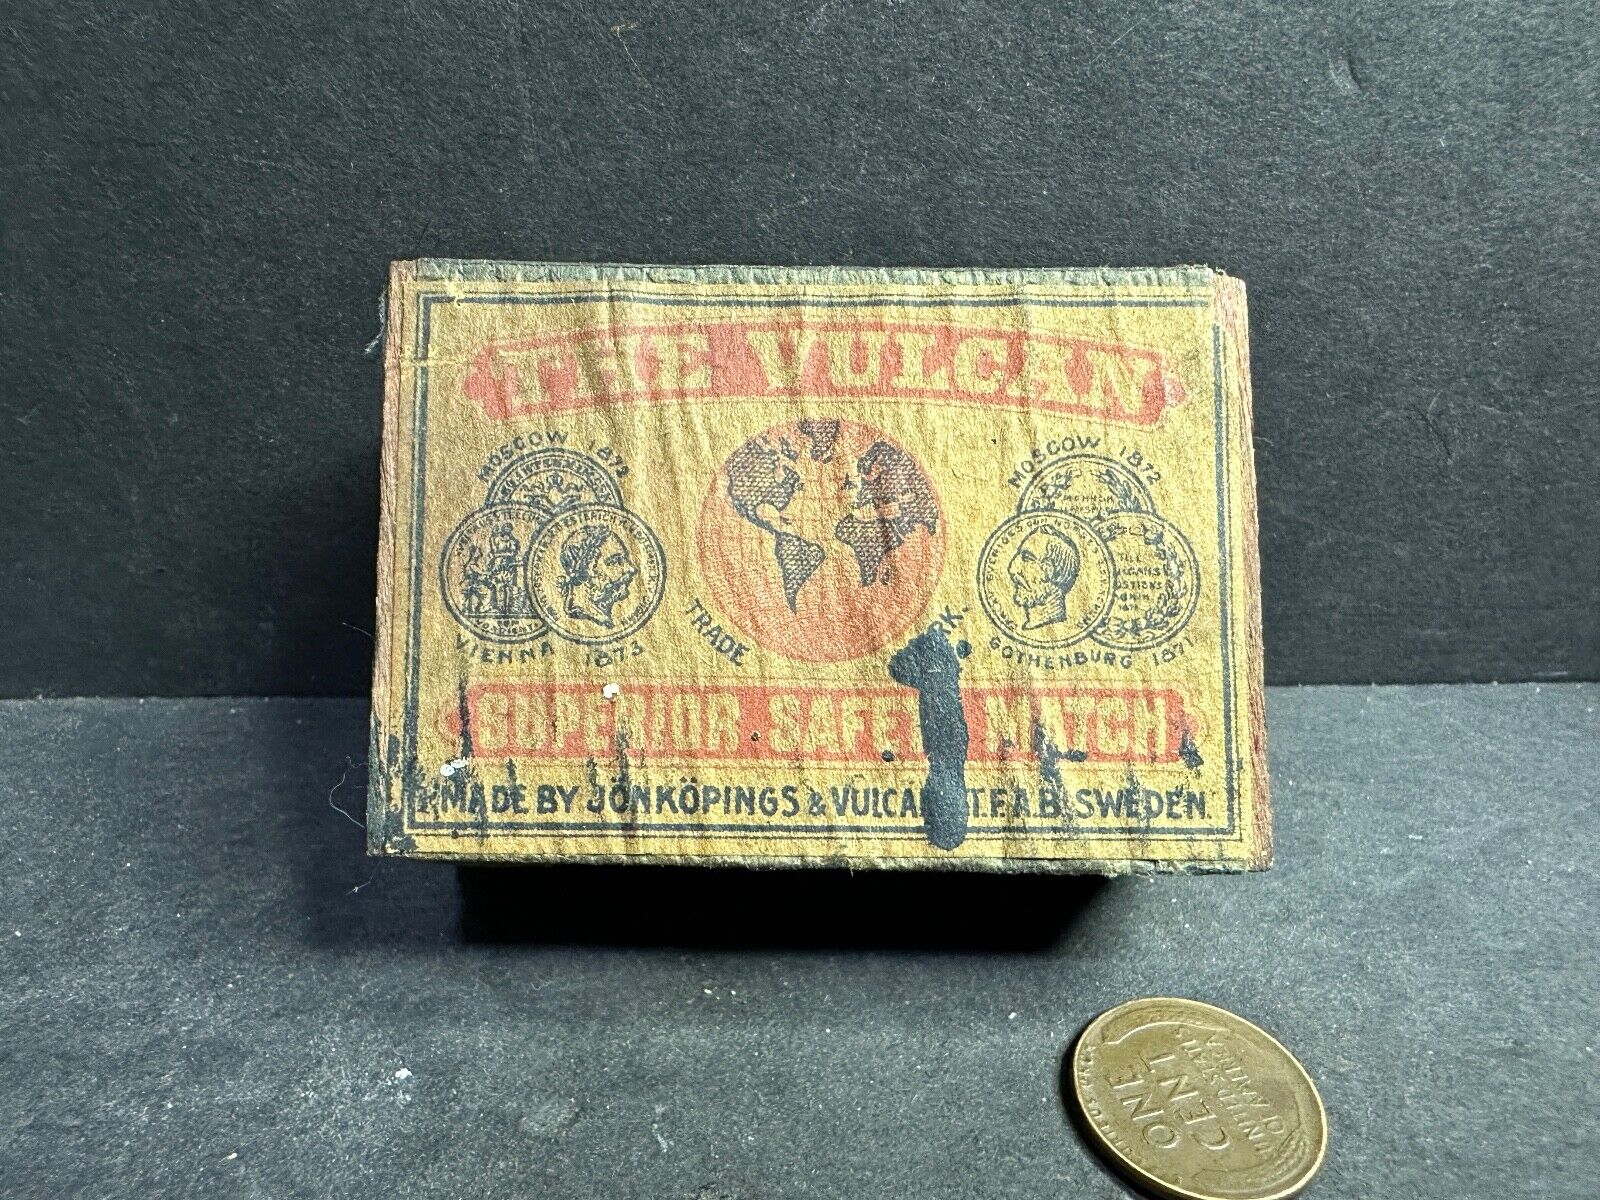 Vintage Full Box, THE VULCAN SUPERIOR SAFETY MATCH, Sweden